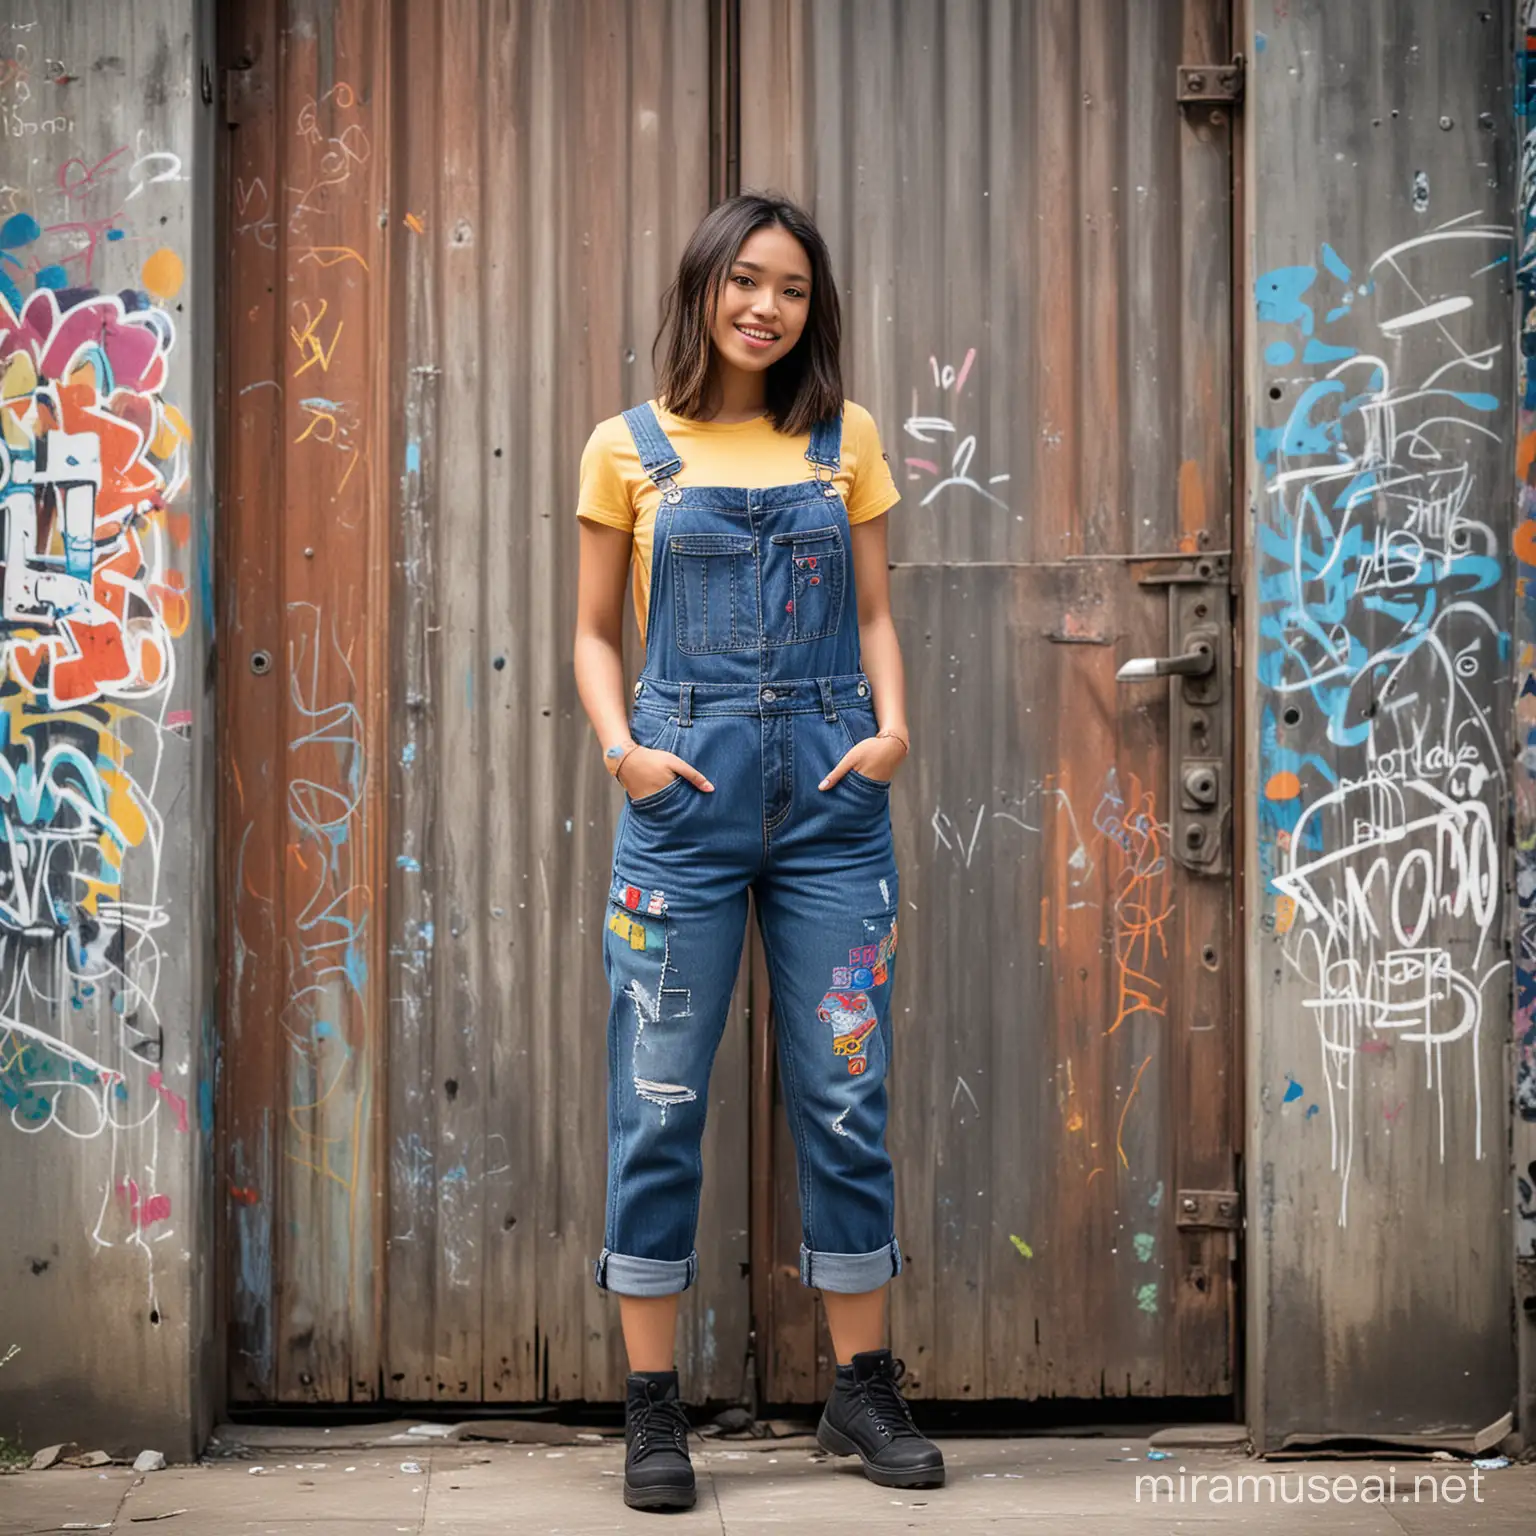 A beautiful 20 year old Indonesian female teenager, wearing contemporary overalls, is standing and posing, the background is a worn steel door with colorful graffiti.